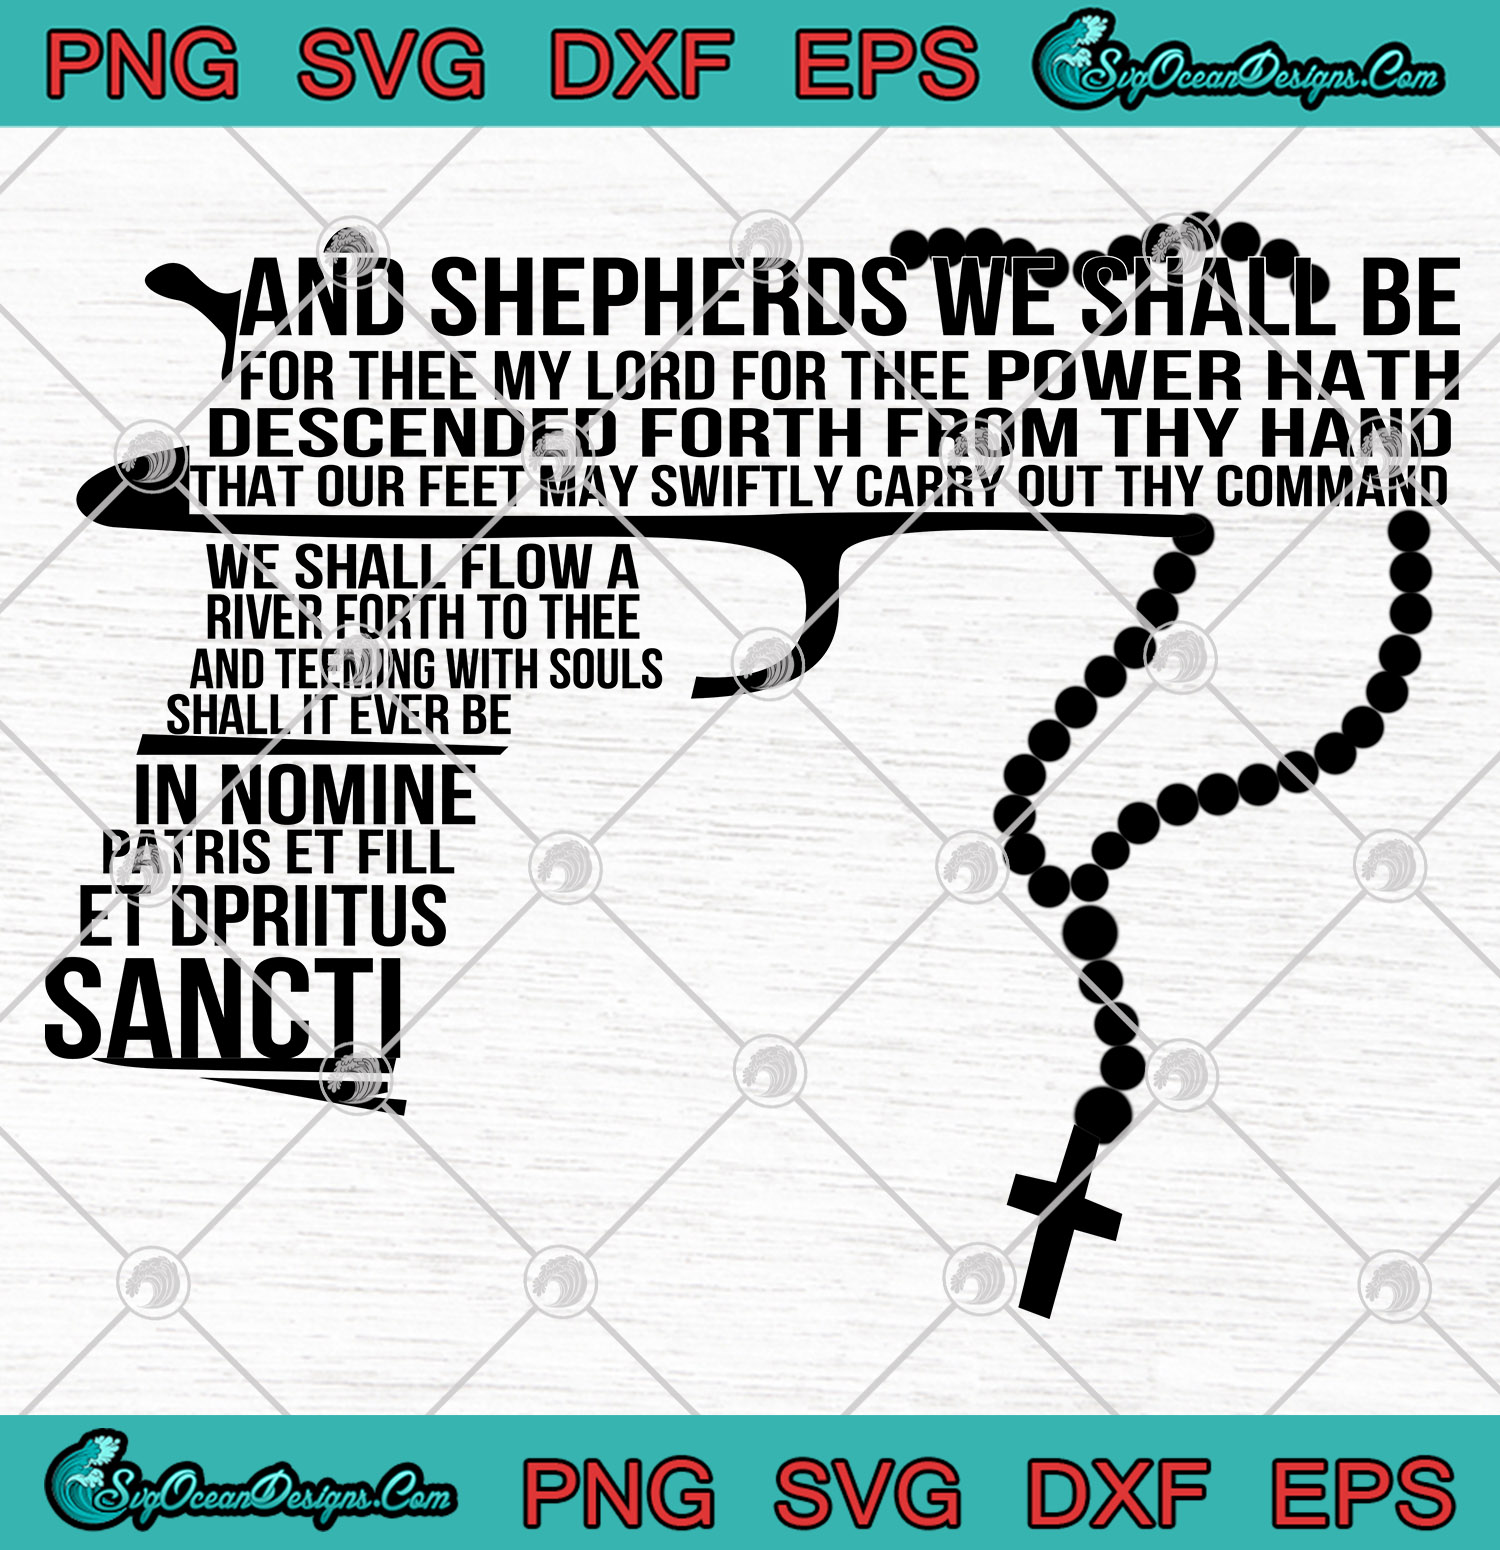 Download Gun And Shepherds We Shall Be For Thee My Lord For Thee ...